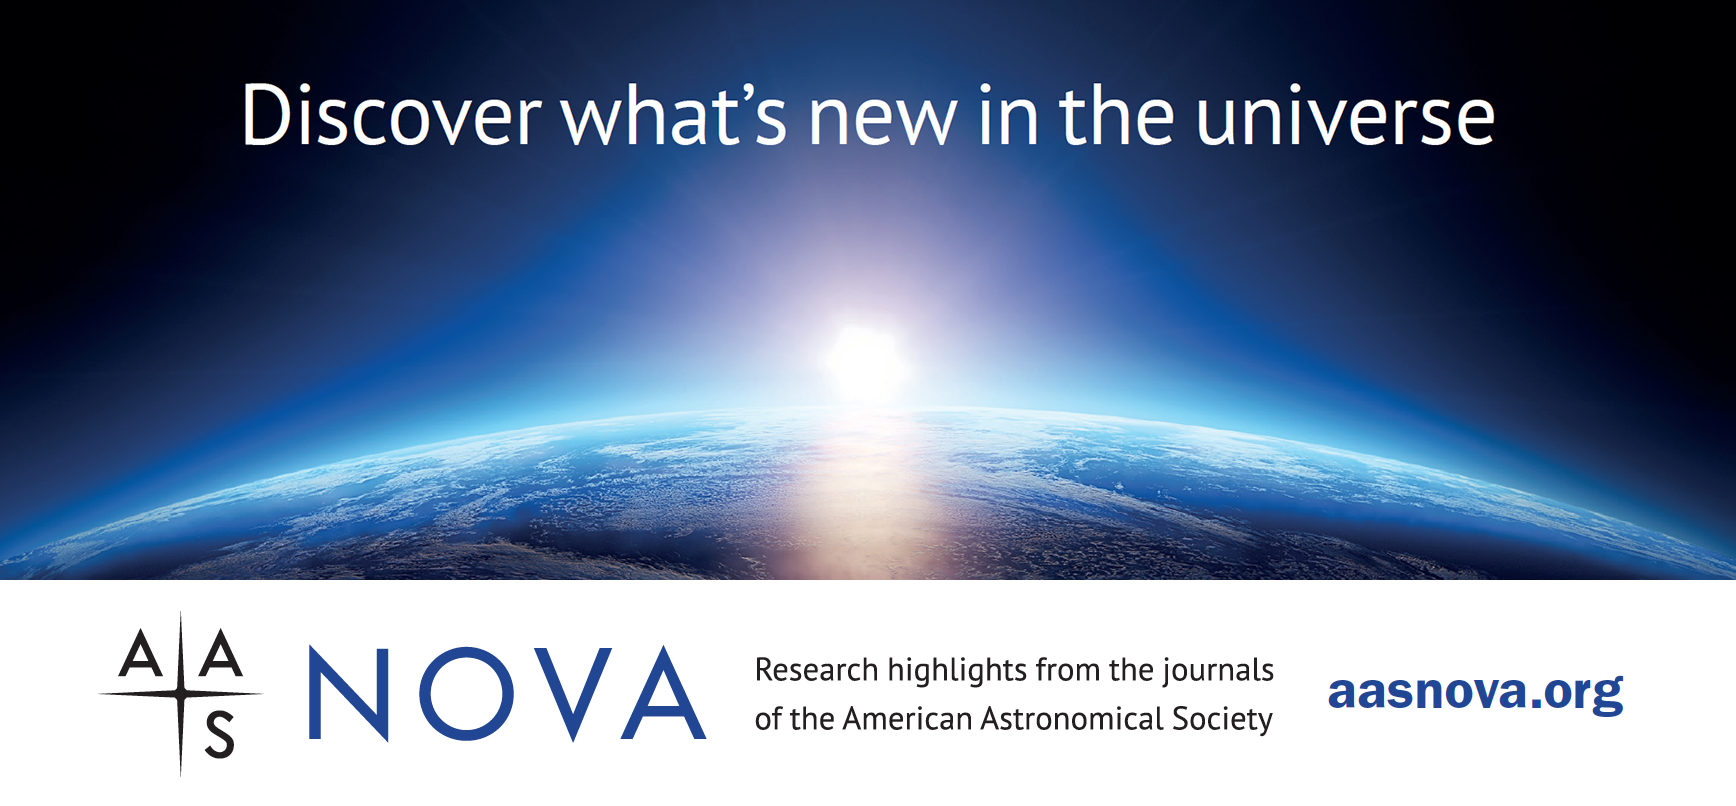 Image of the Sun rising behind the Earth's horizon with the text "Discover what's new in the universe", the AAS Nova logo, and "aasnova.org" superposed.